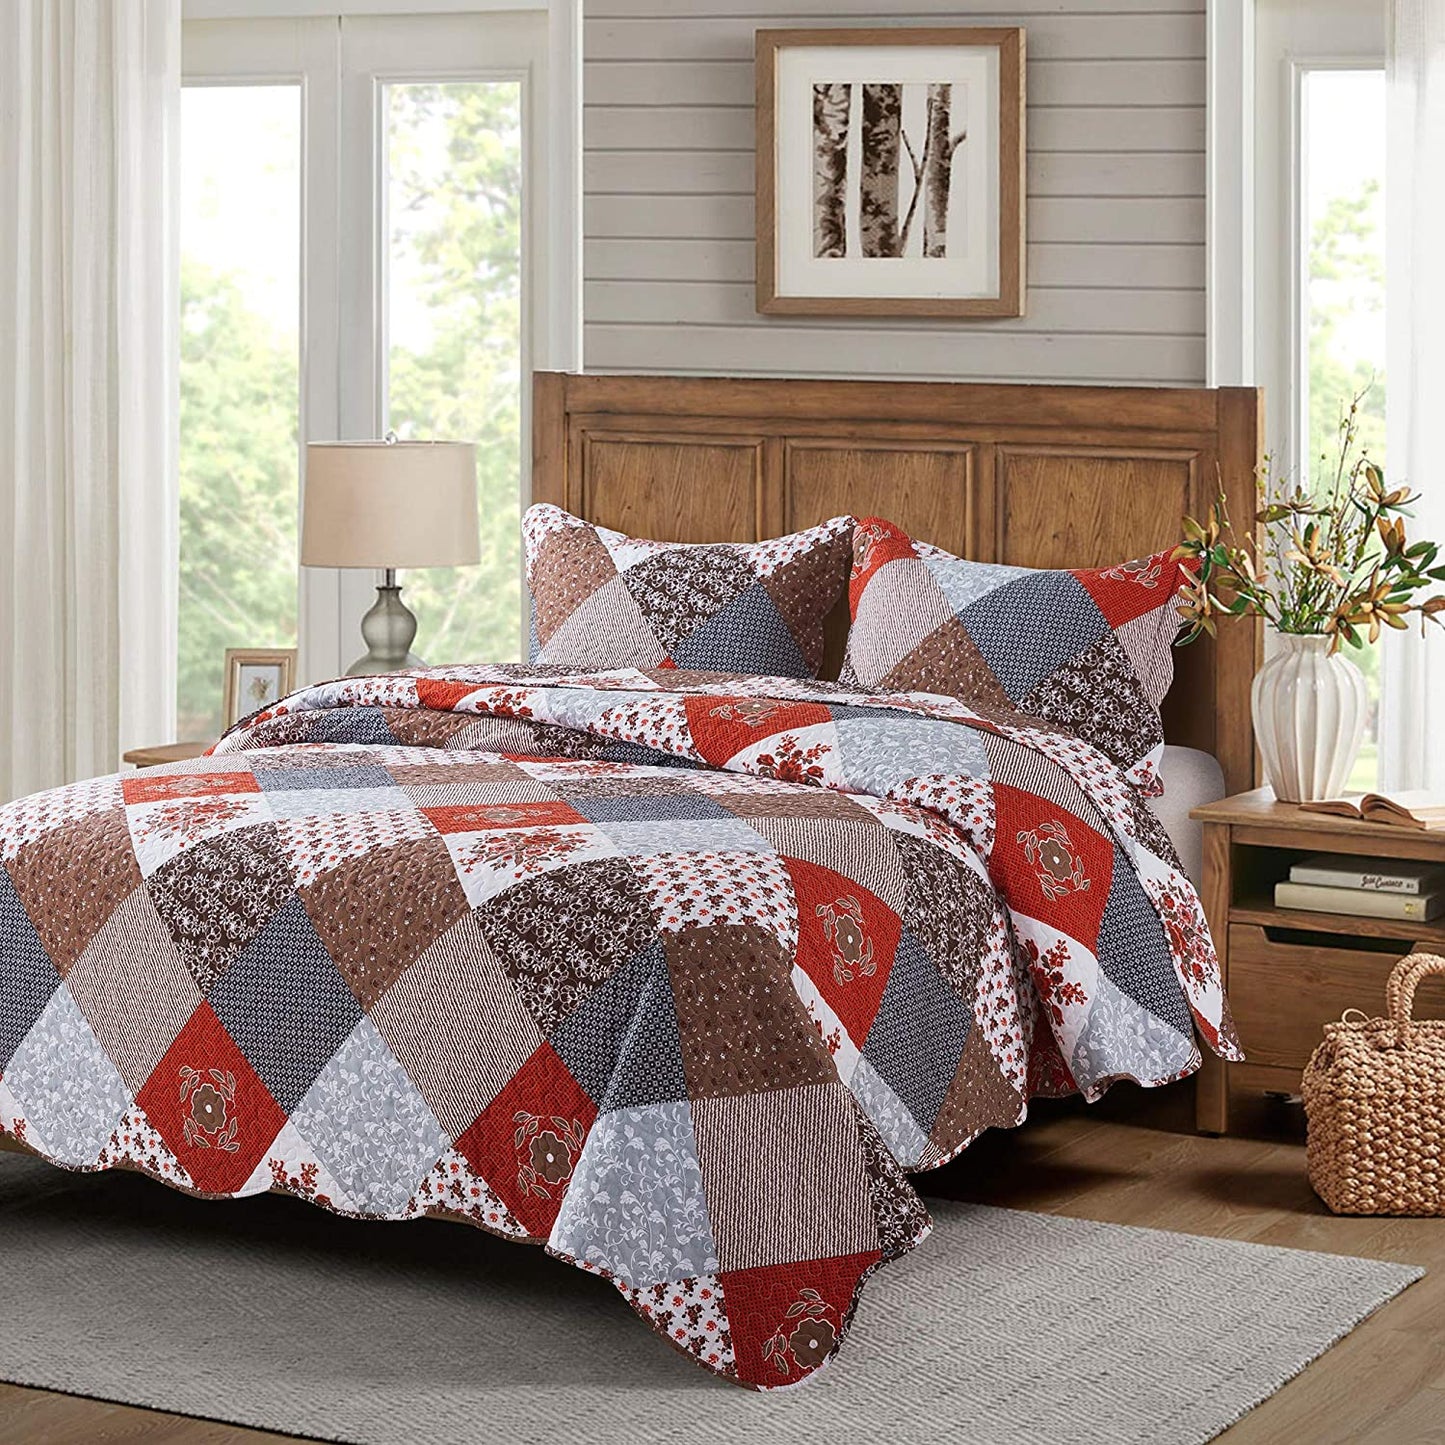 Colorful Decorative Bohemian Style 3 Quilt Set With 2 Pillowcases